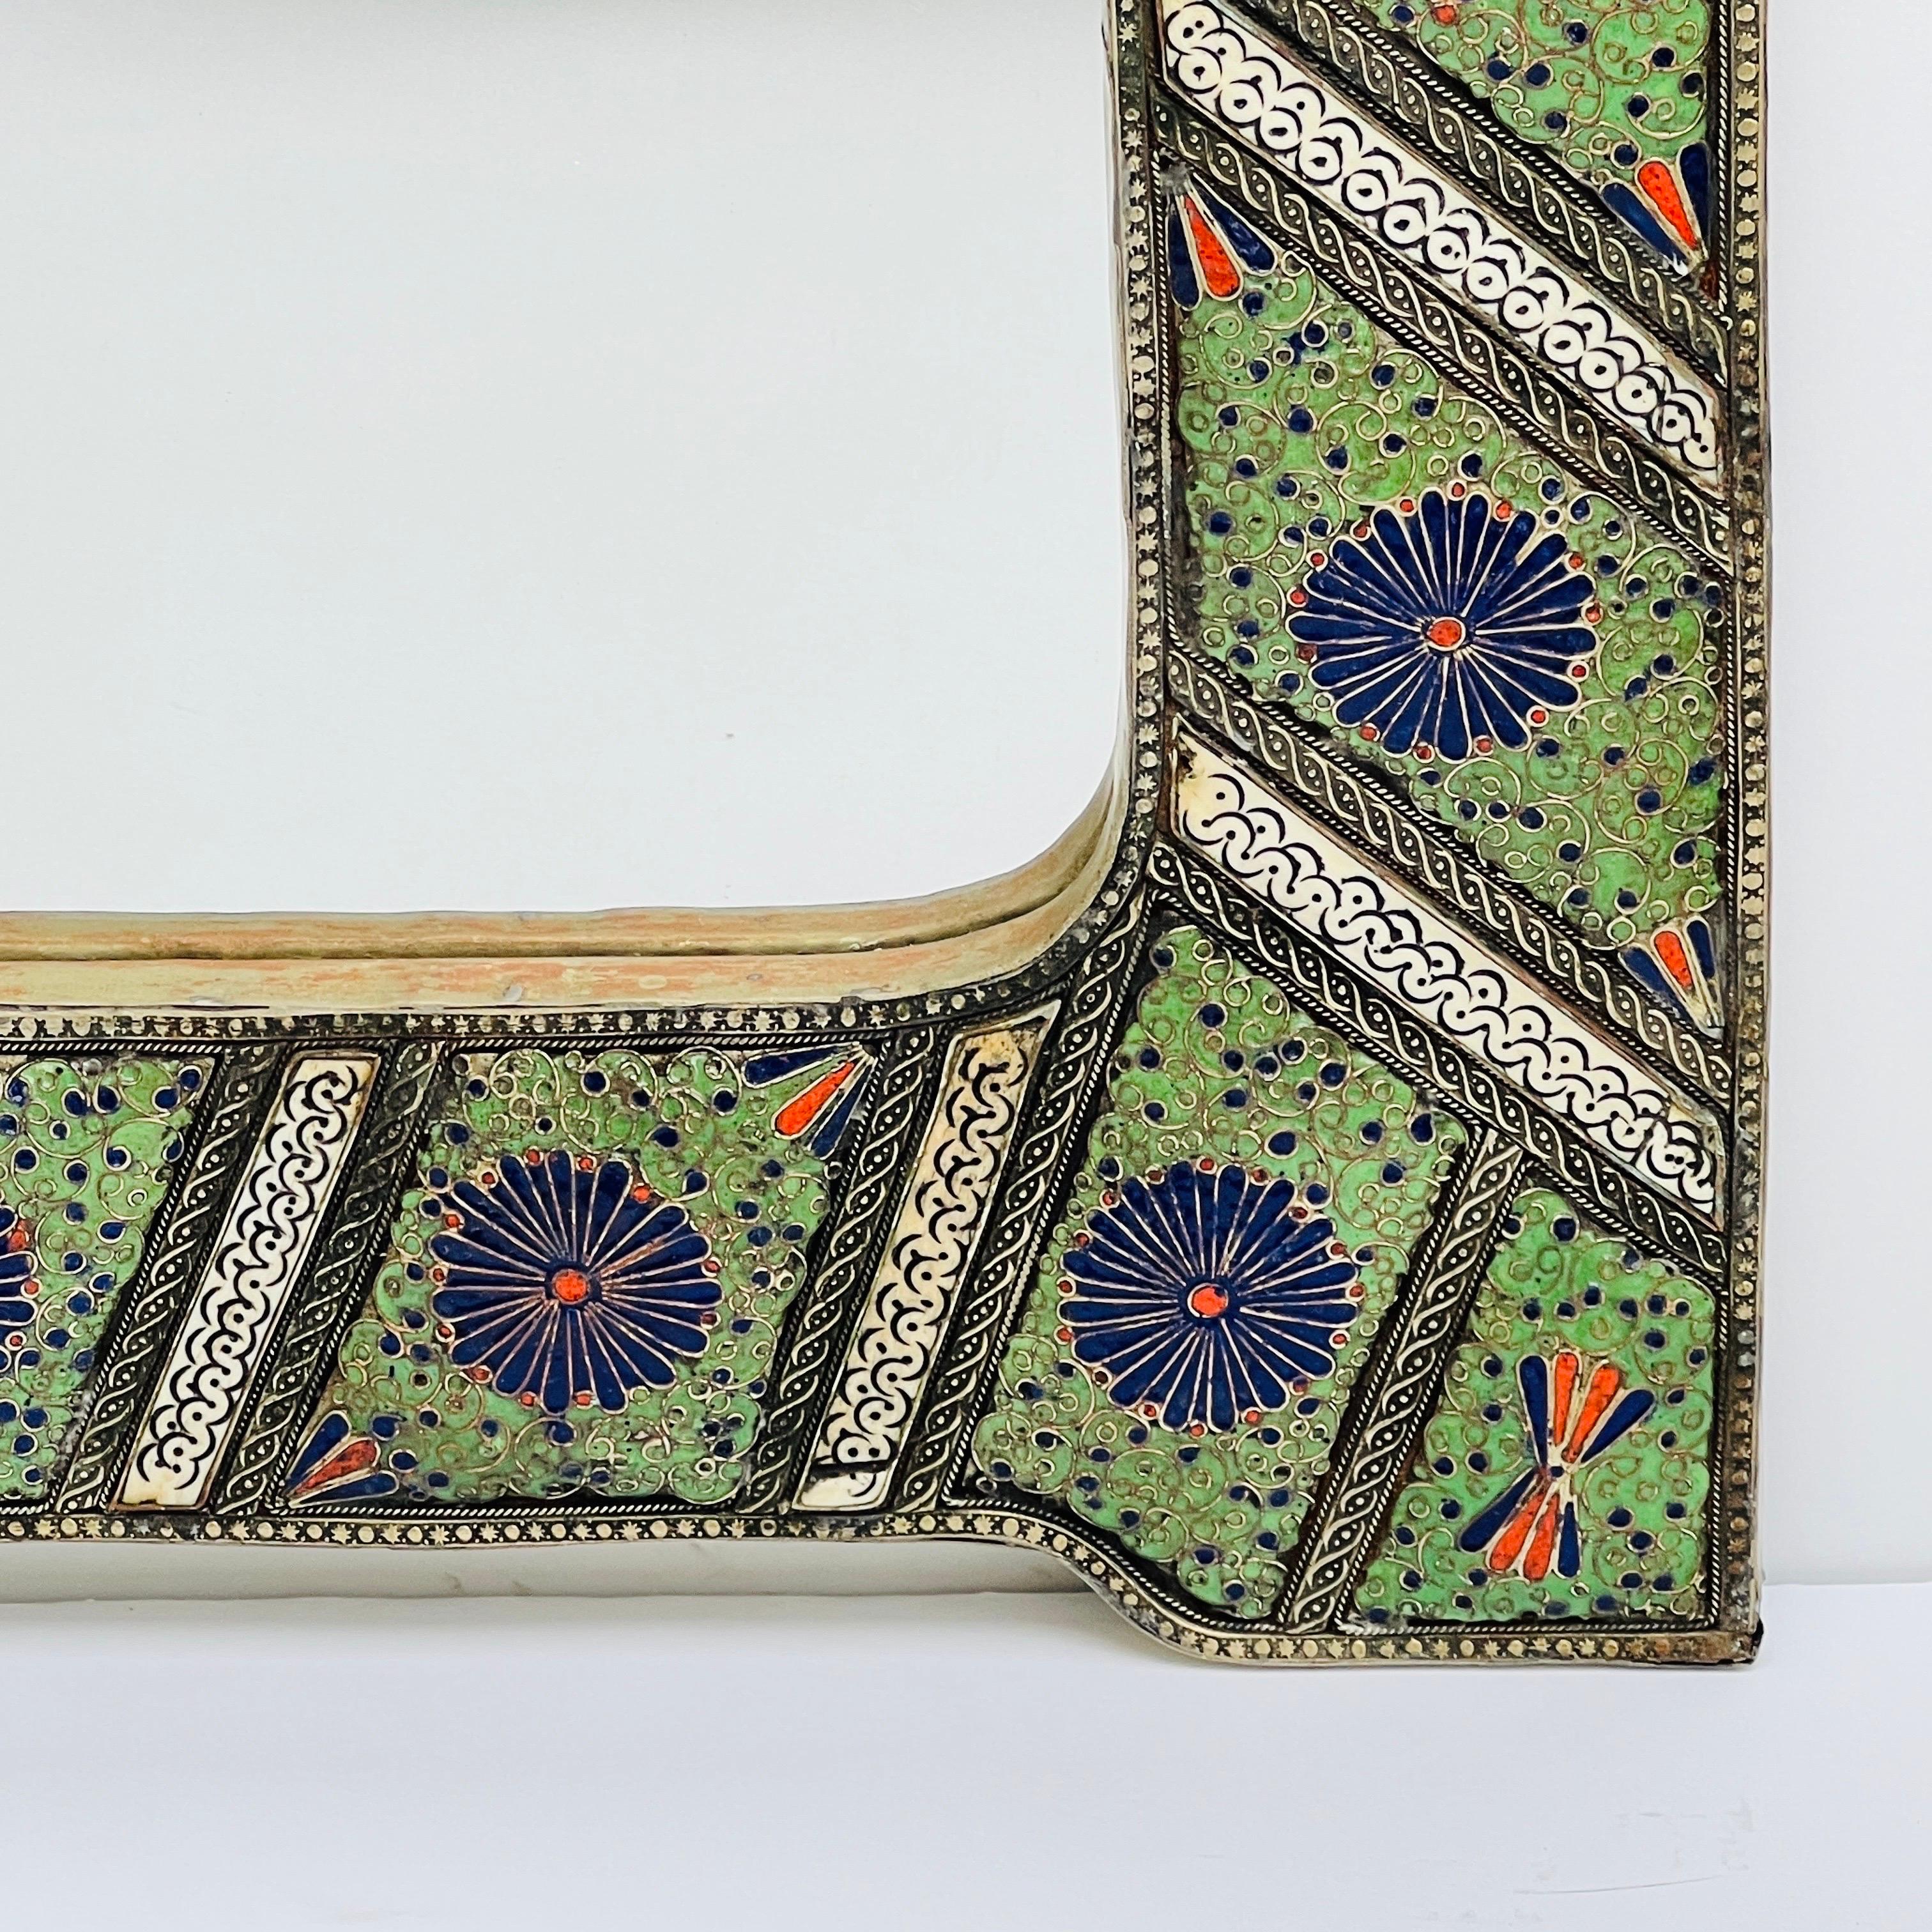 Moorish Arch Mirror in Enameled Cloisonné with Bone Inlays, Morocco c. 1950's For Sale 1